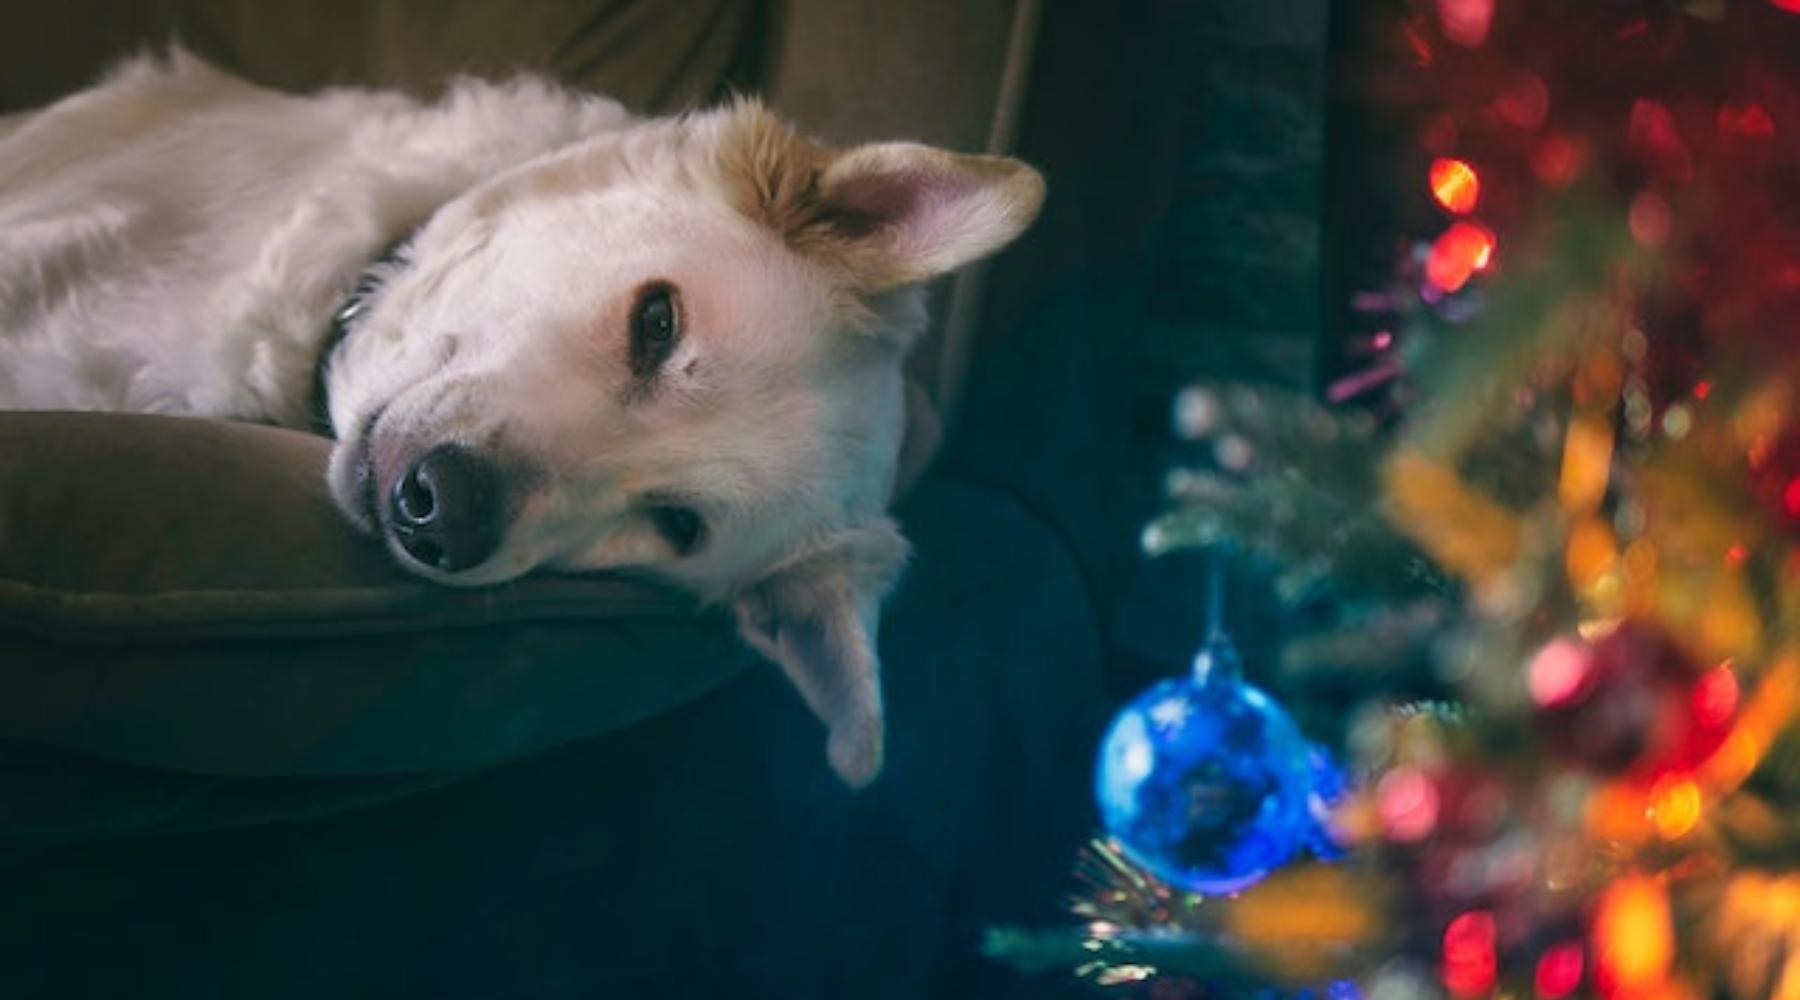 How to deal with your dogs during holiday stress